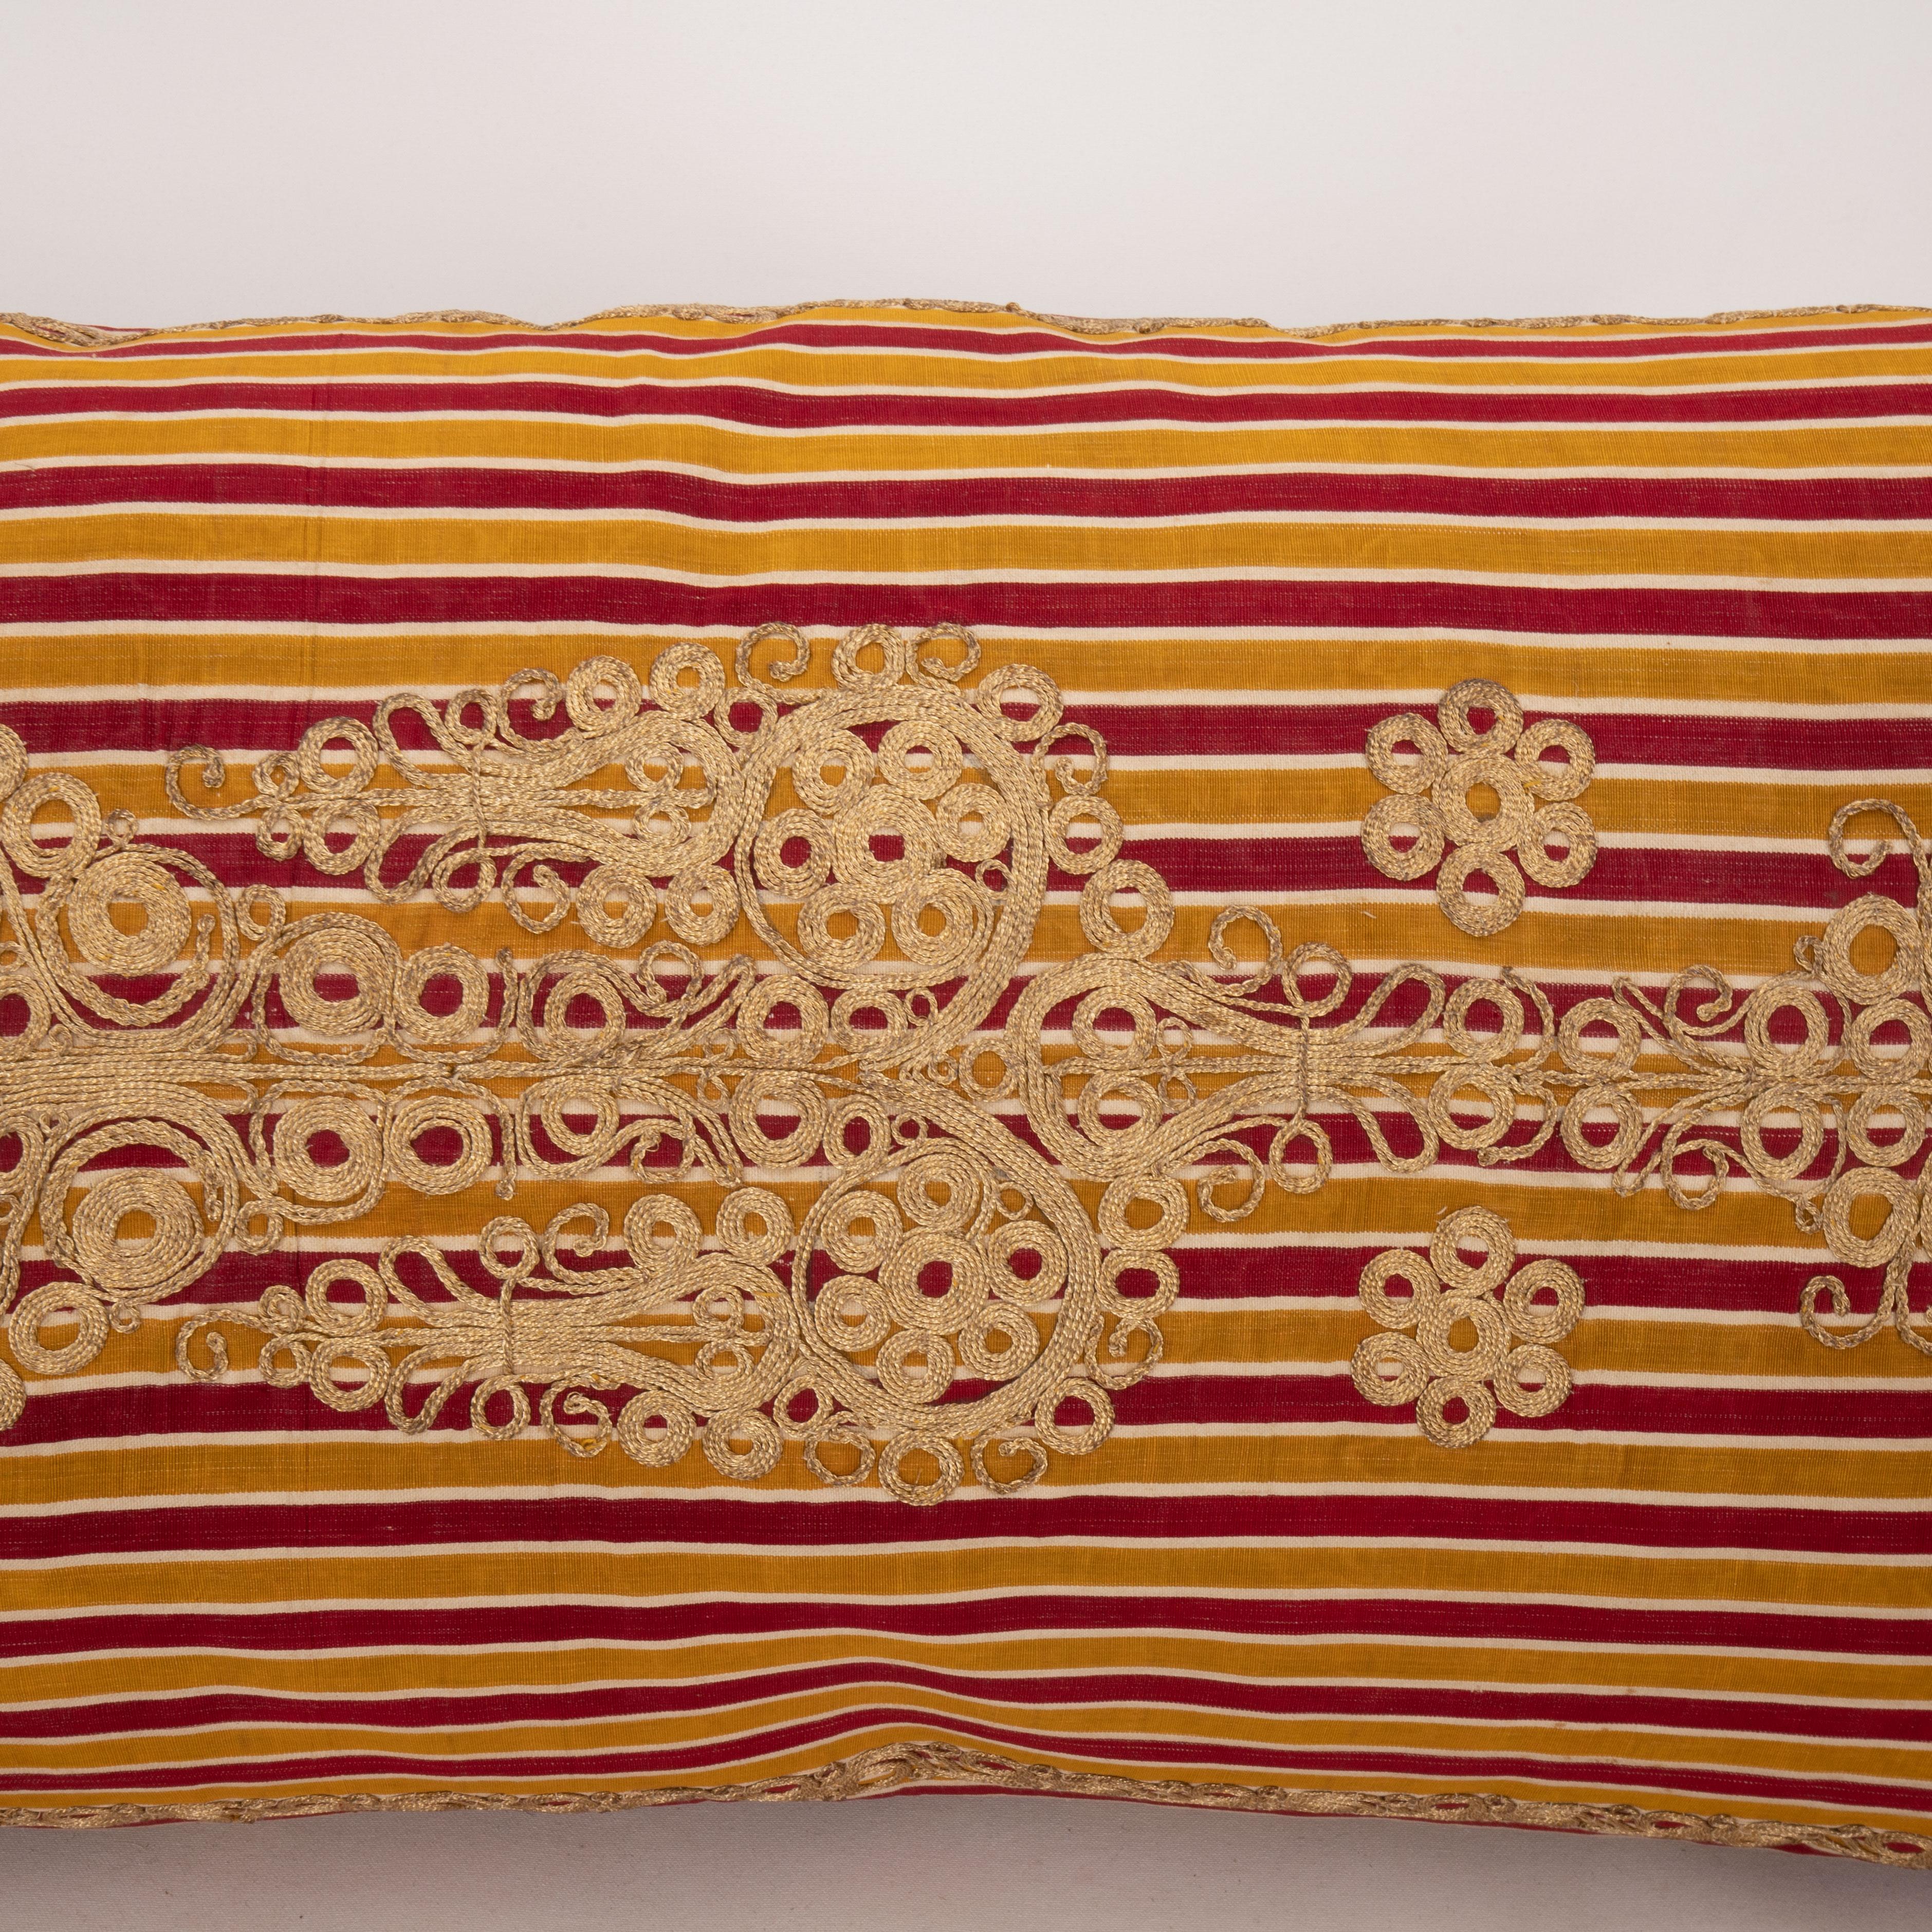 Embroidered Antique Ottoman Turkish Pillow Case, Early 20th C.